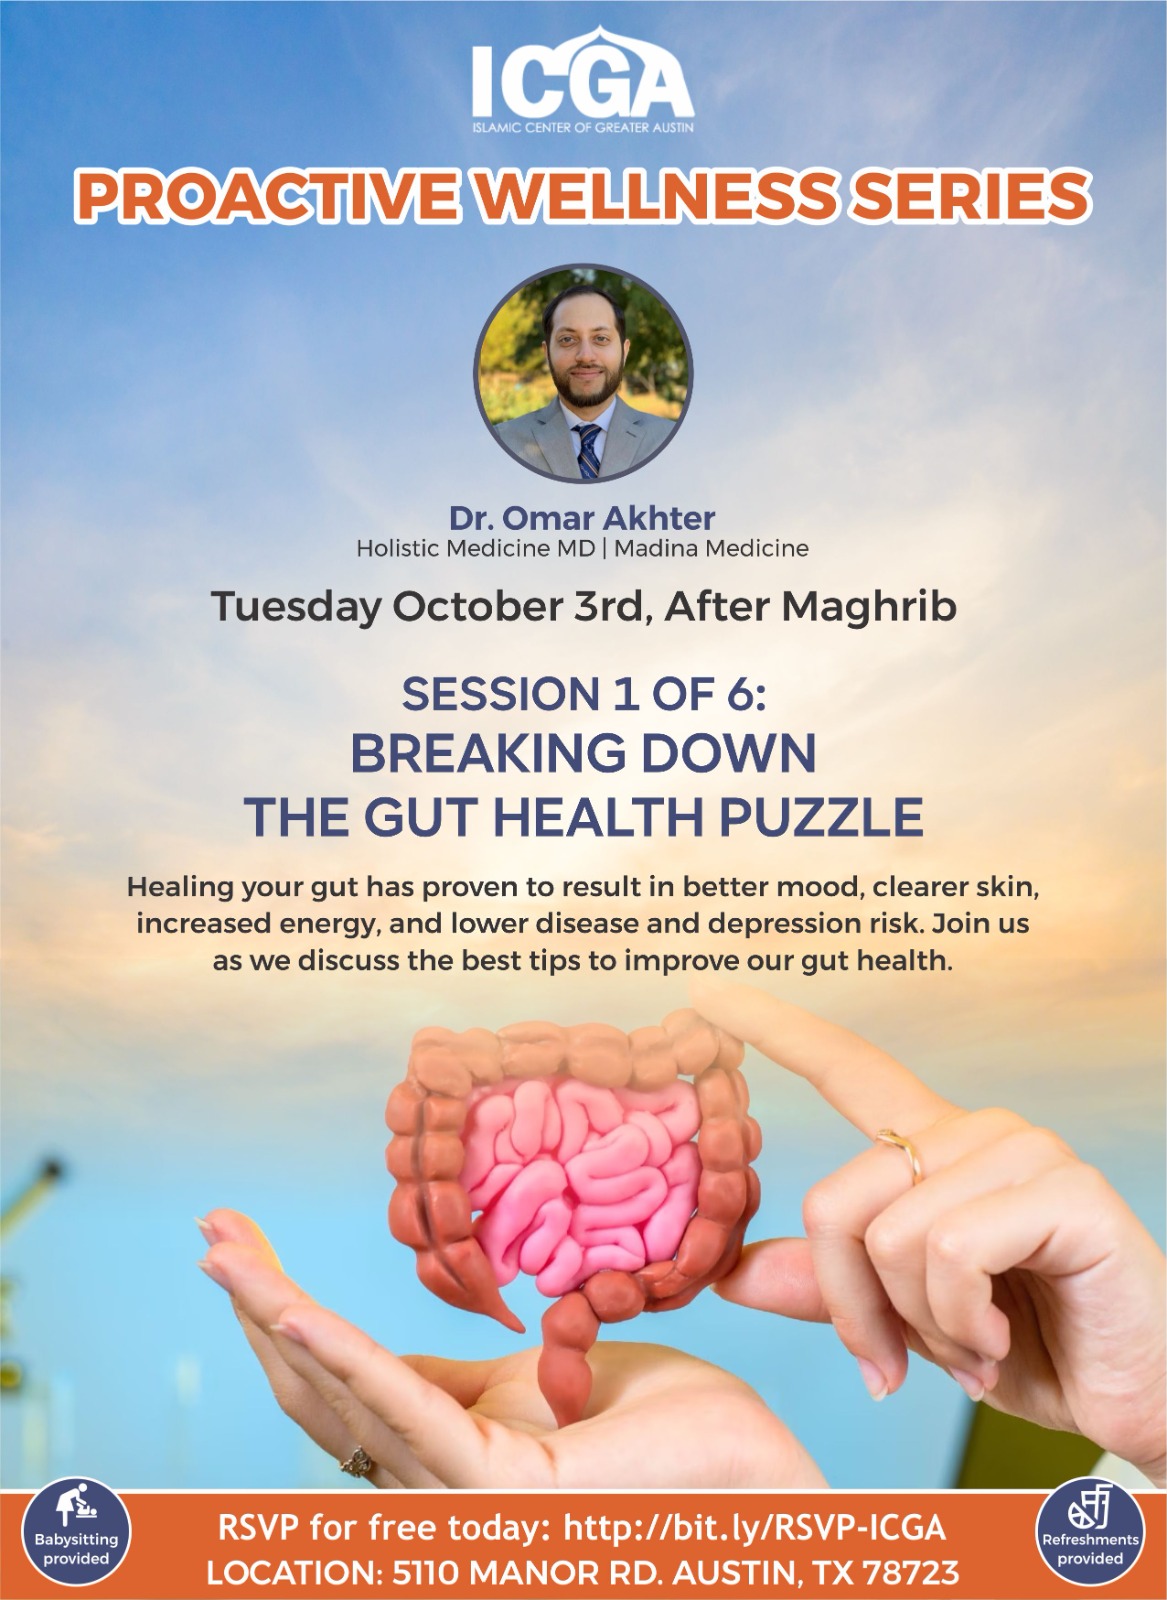 Proactive Wellness Series flyer - Breaking down the gut health puzzle.